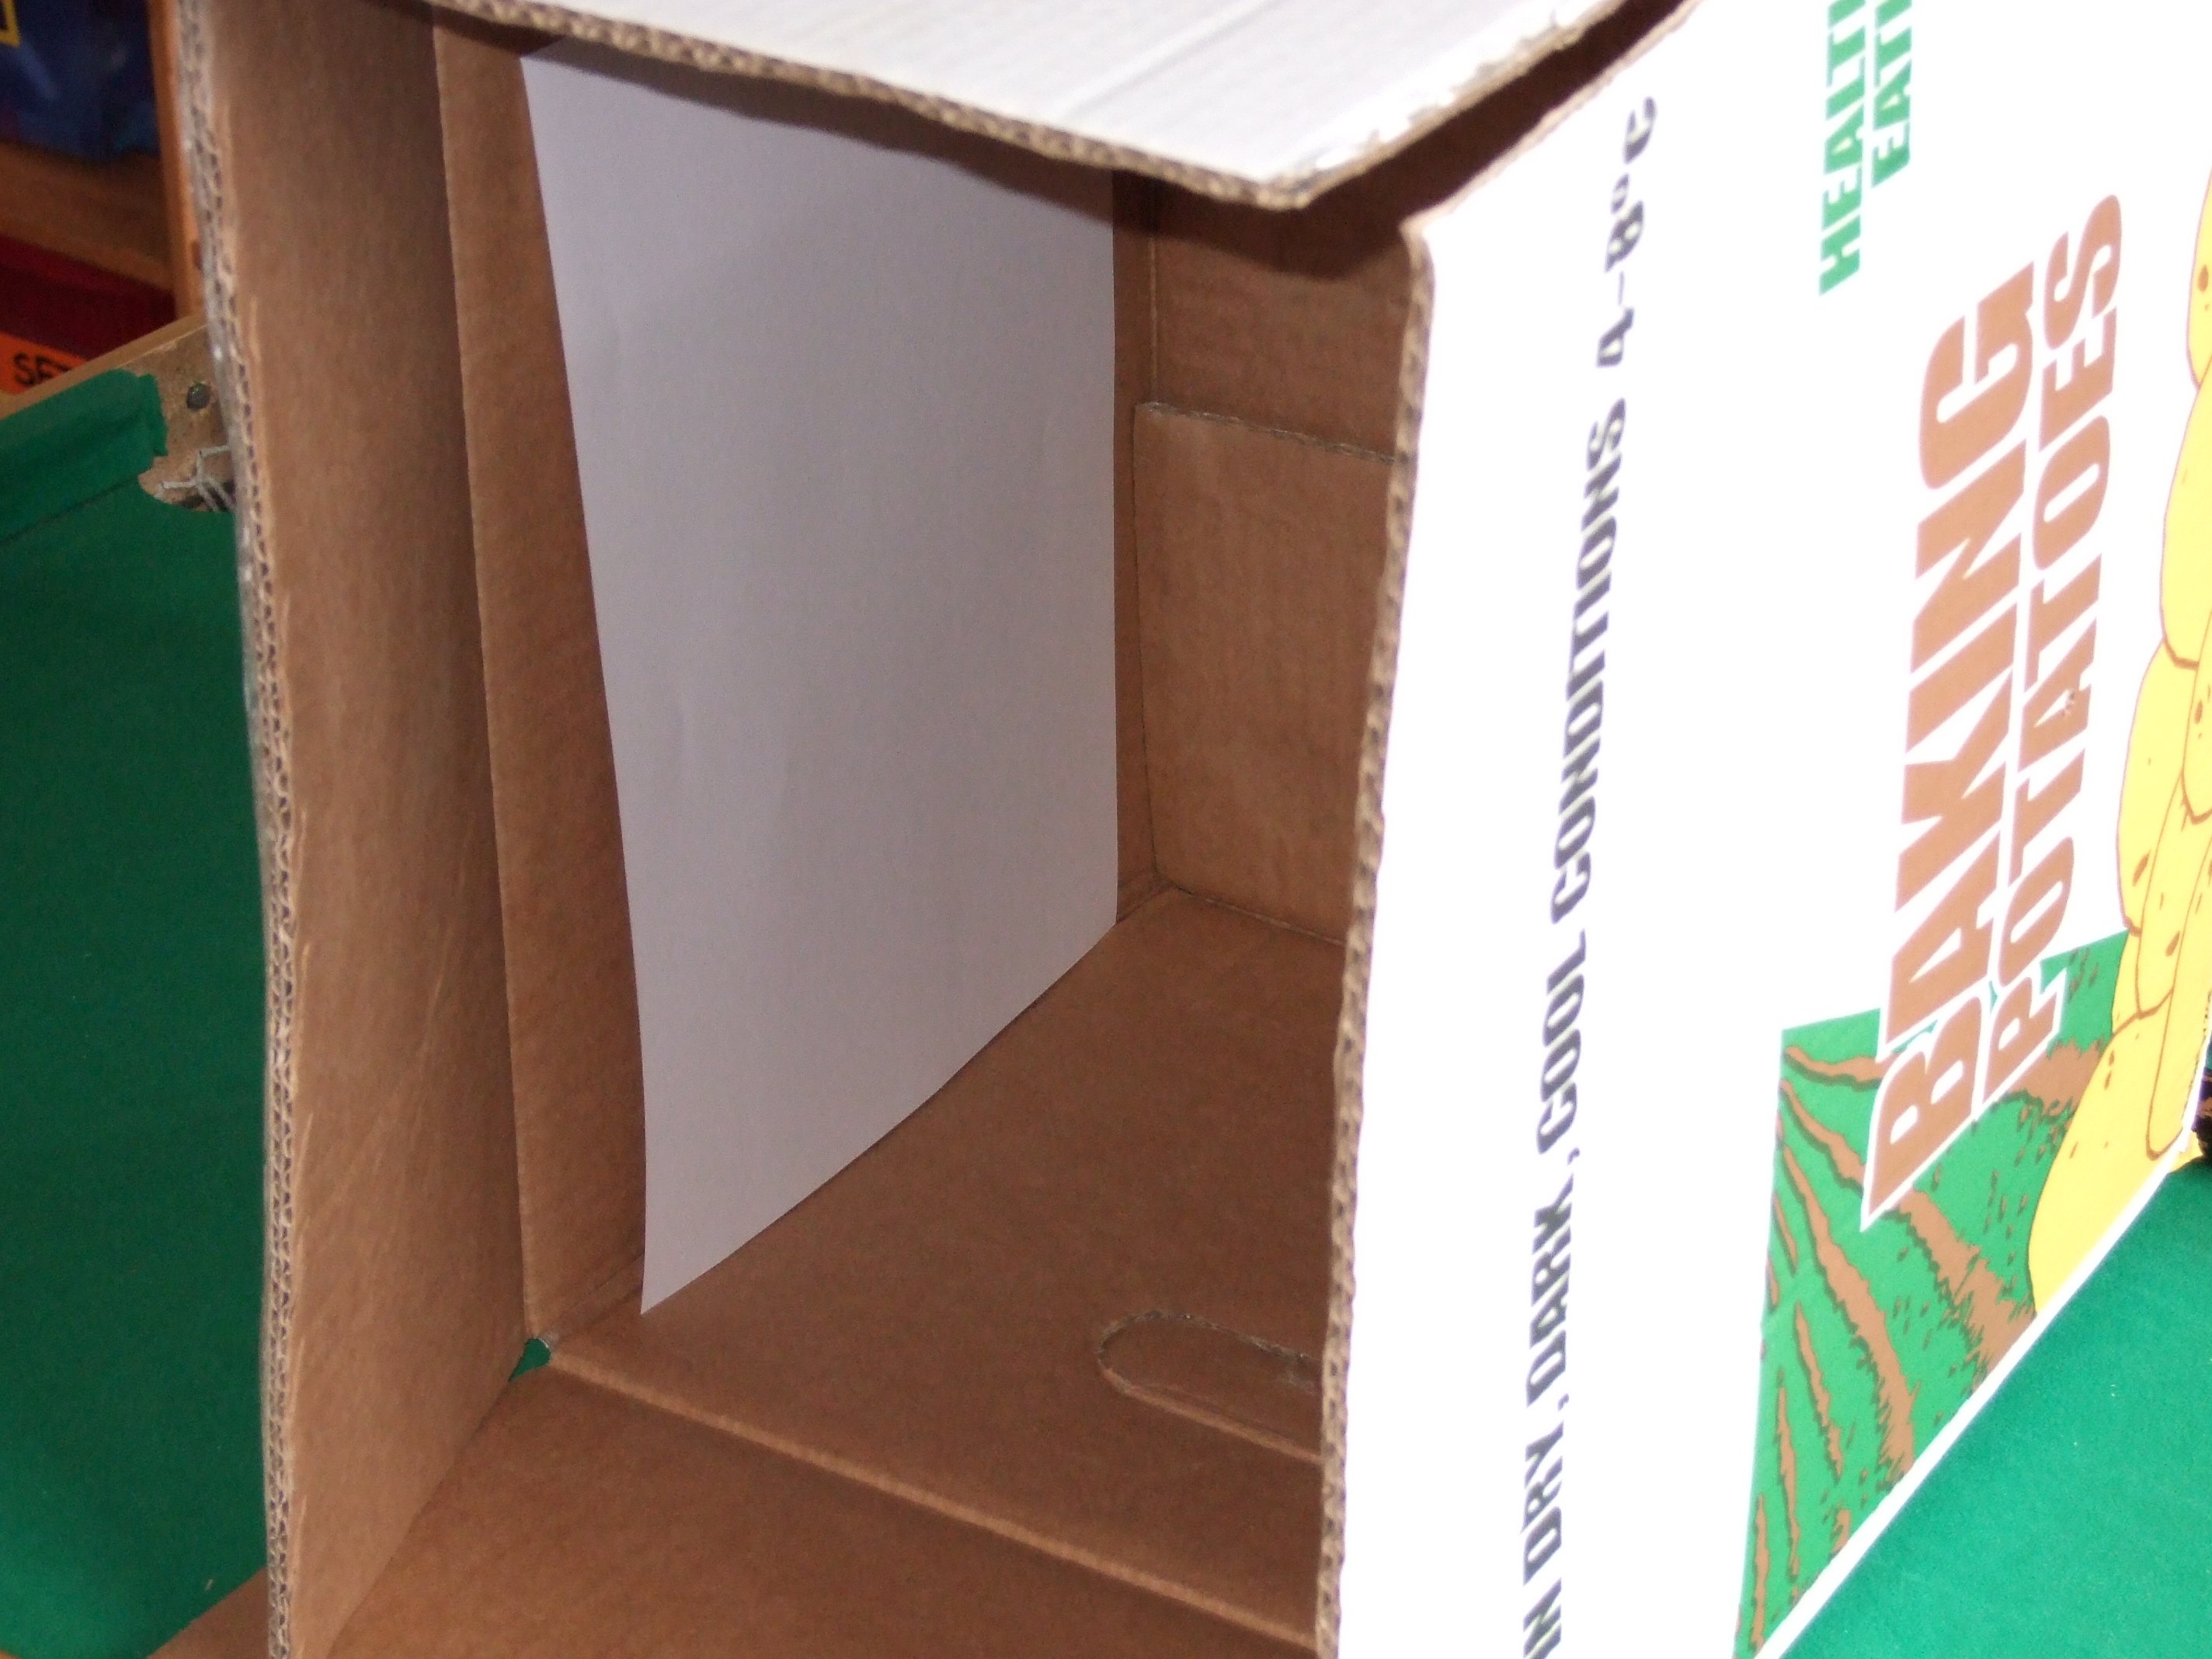 Carboard Box